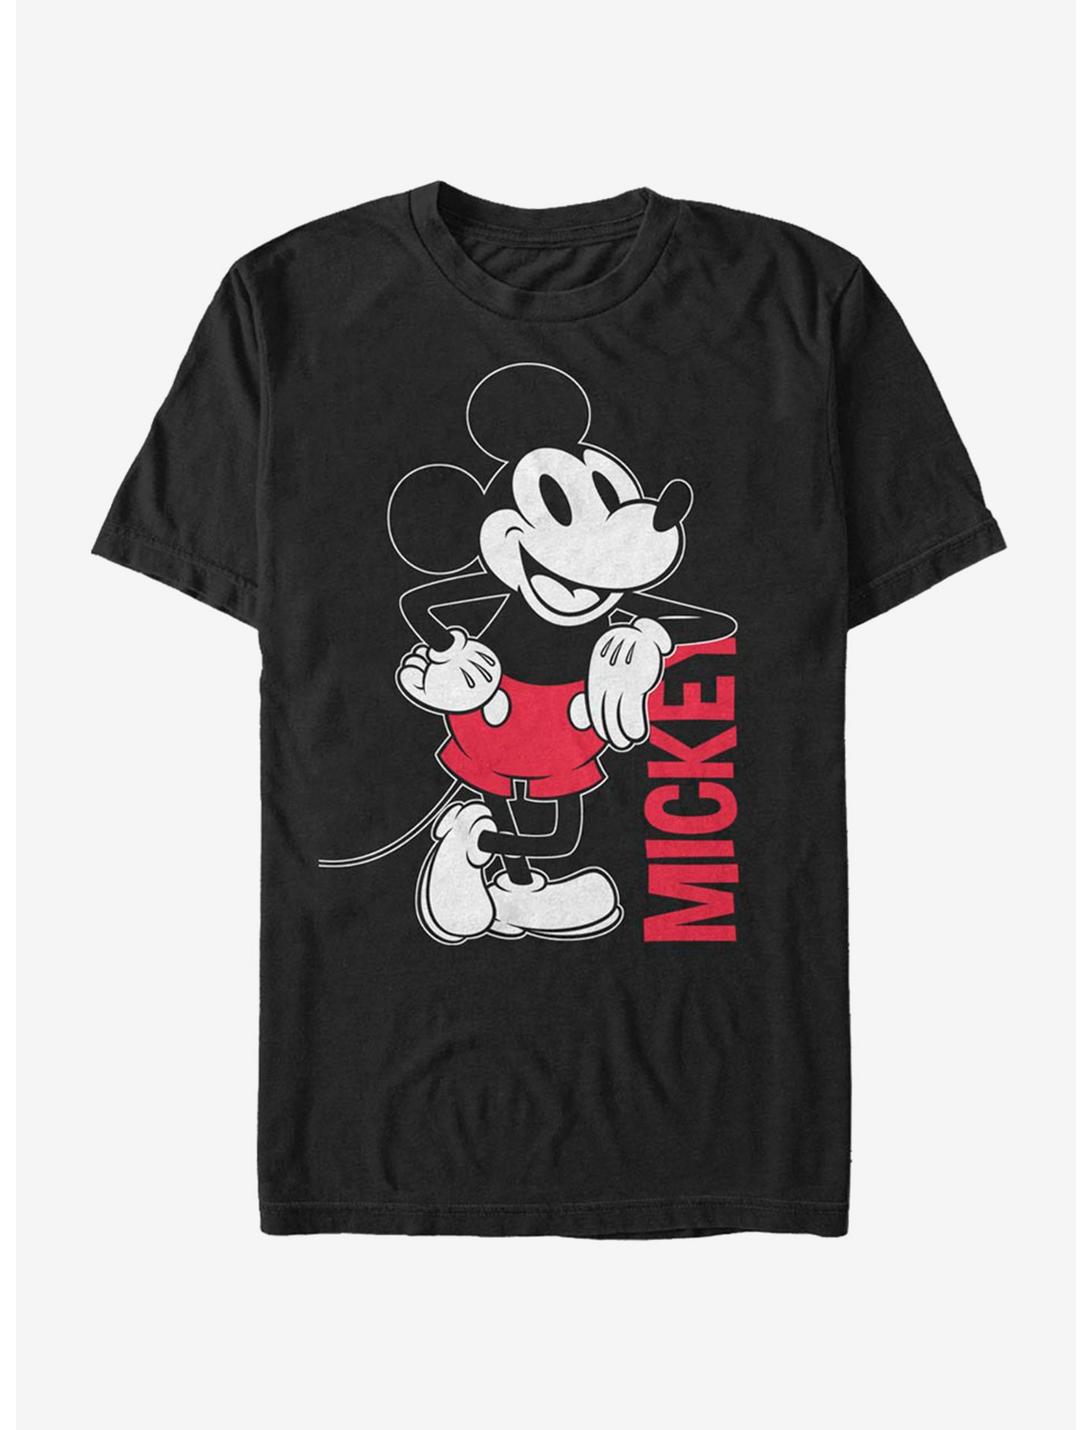 Disney Mickey Mouse Mickey Leaning T-Shirt, BLACK, hi-res